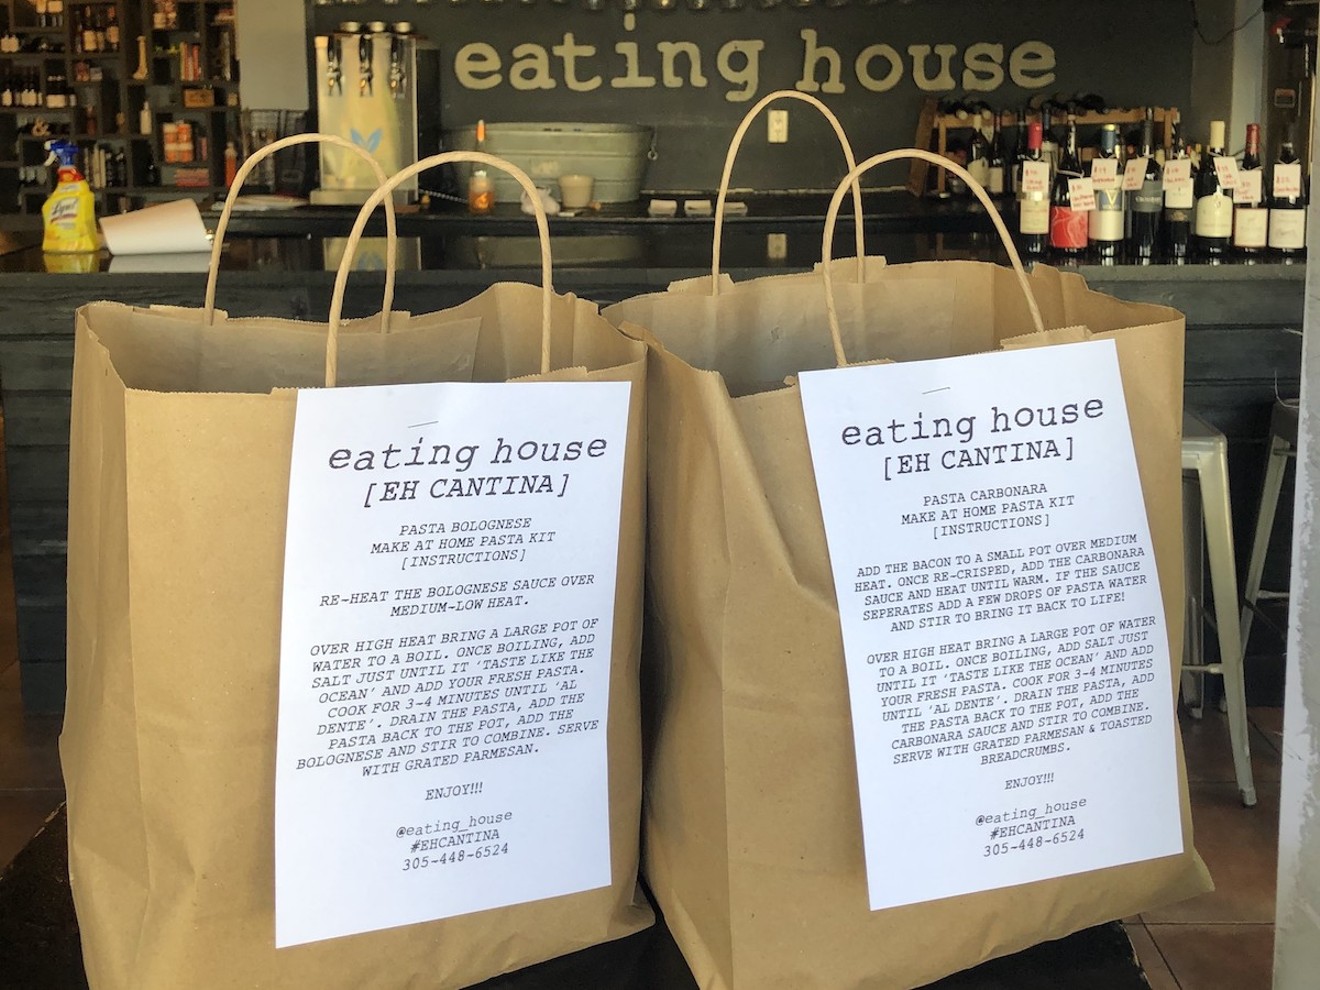 To-go meal kits from Eating House.